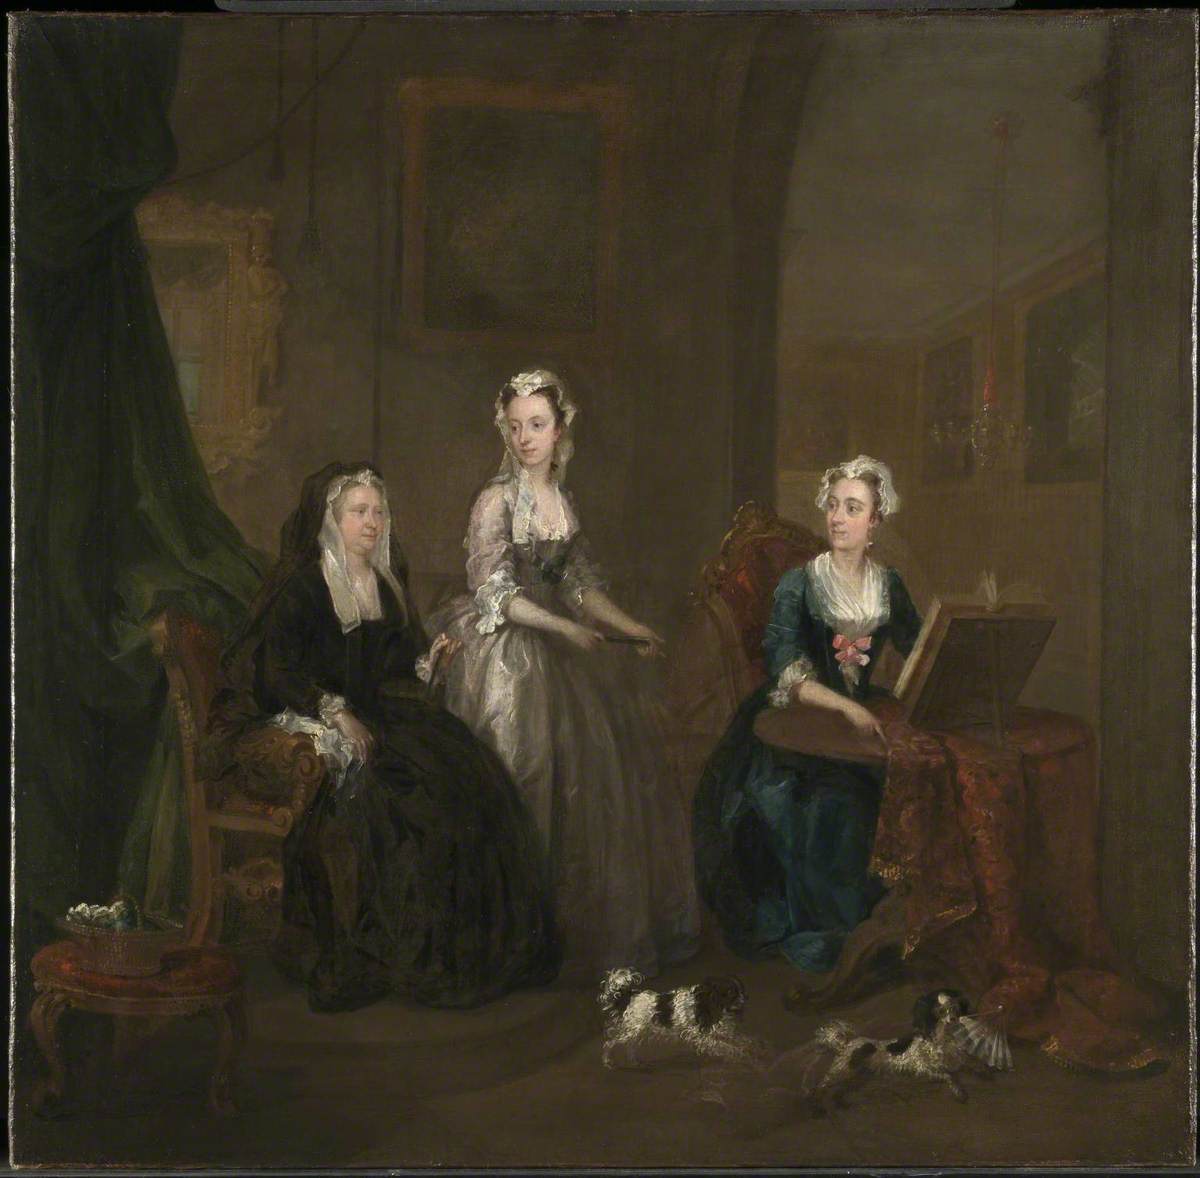 Three Ladies in a Grand Interior ('The Broken Fan'), possibly Catherine Darnley, Duchess of Buckingham with Two Ladies